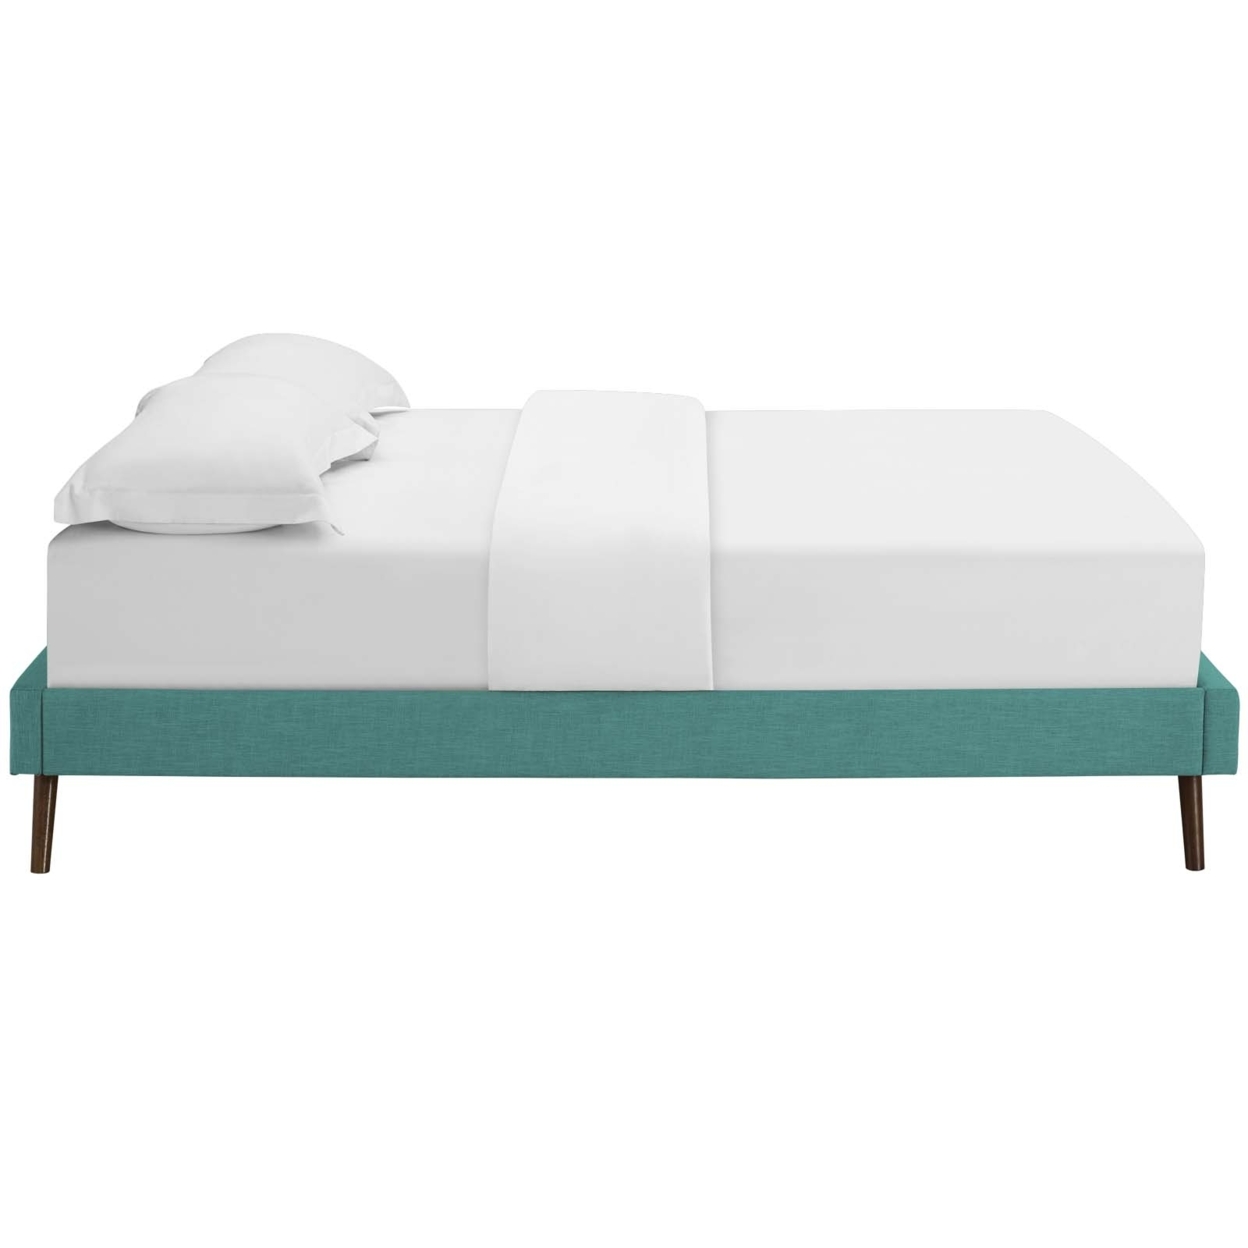 Loryn Full Fabric Bed Frame With Round Splayed Legs, Teal